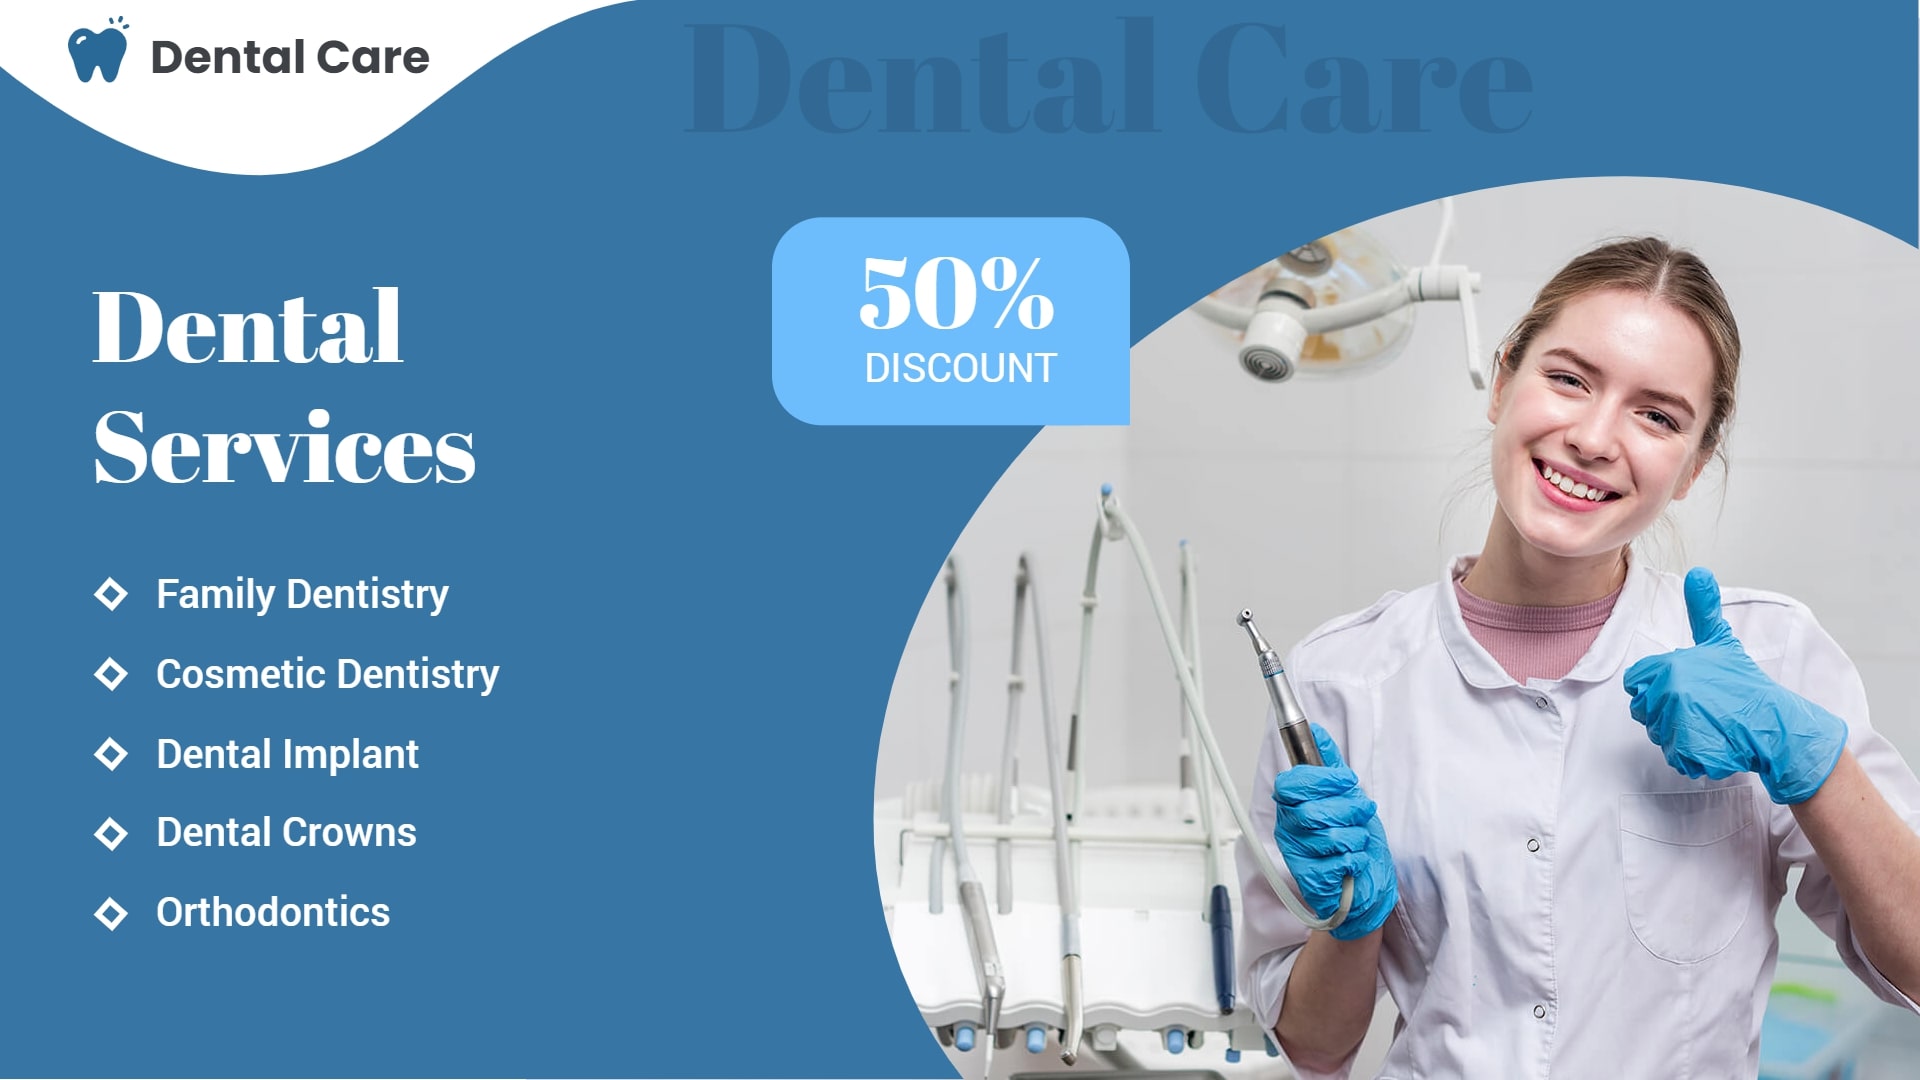 promote your dental service offers